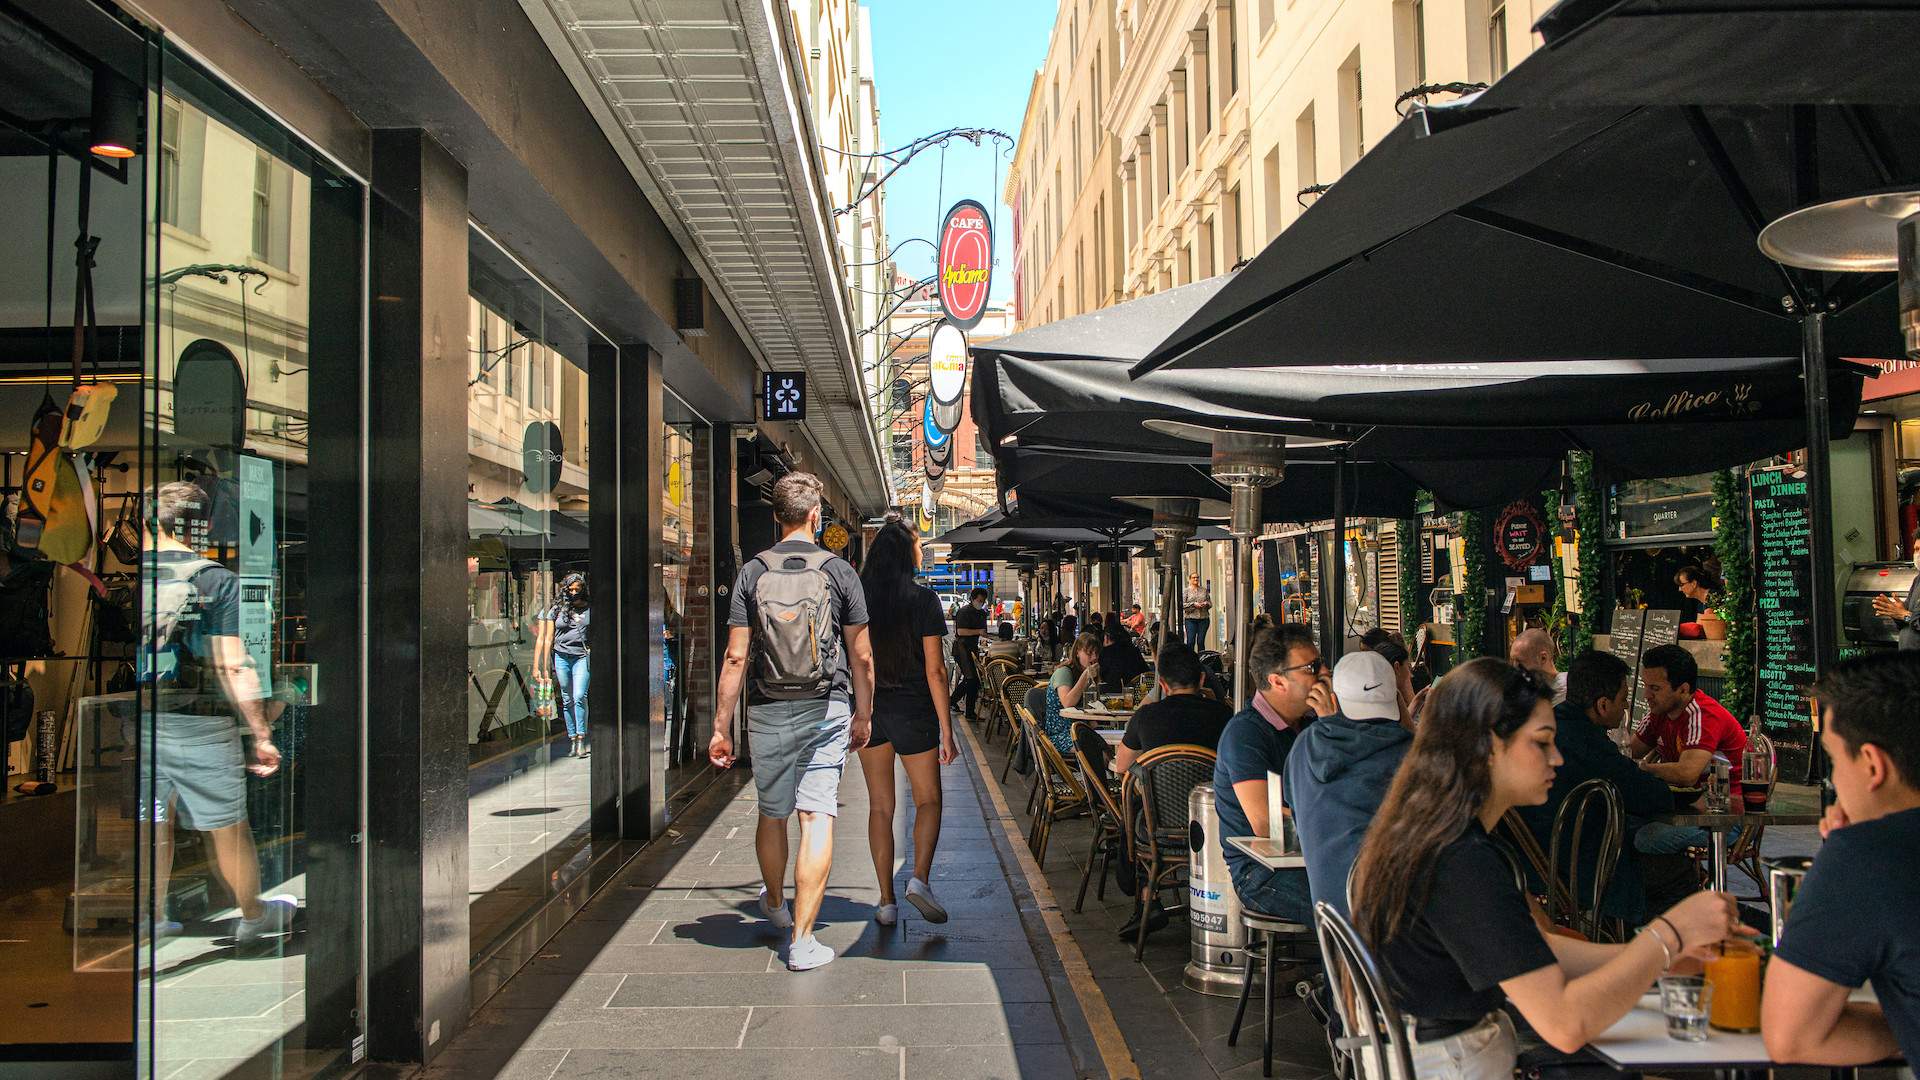 A New Policy Update by the City of Melbourne Will Help Protect the CBD's Laneway Culture